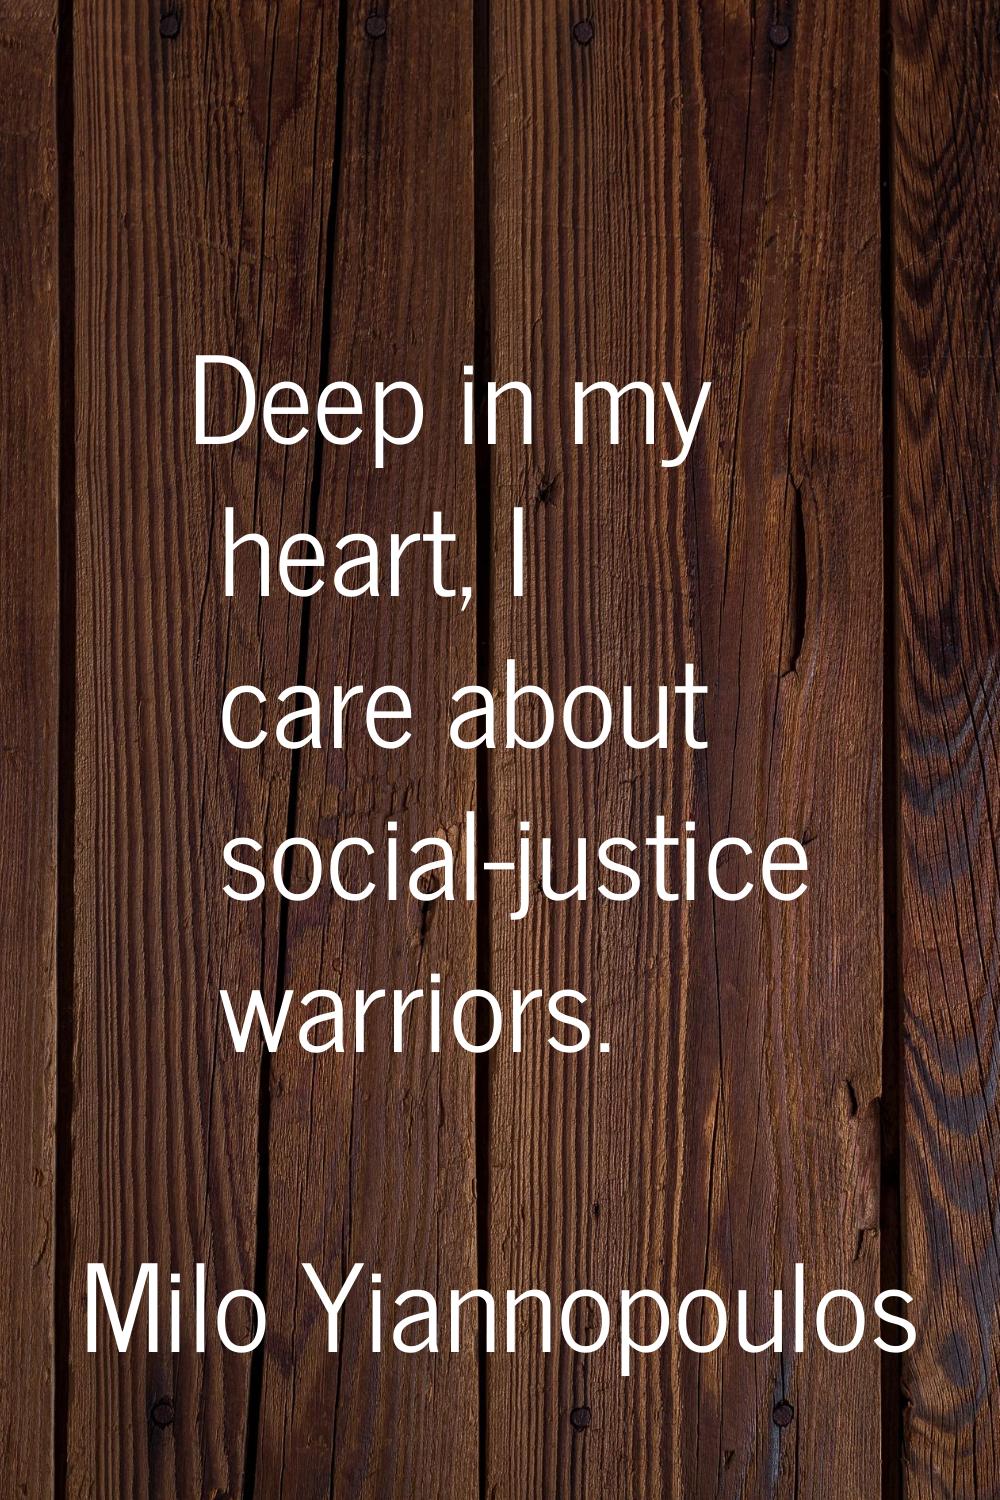 Deep in my heart, I care about social-justice warriors.